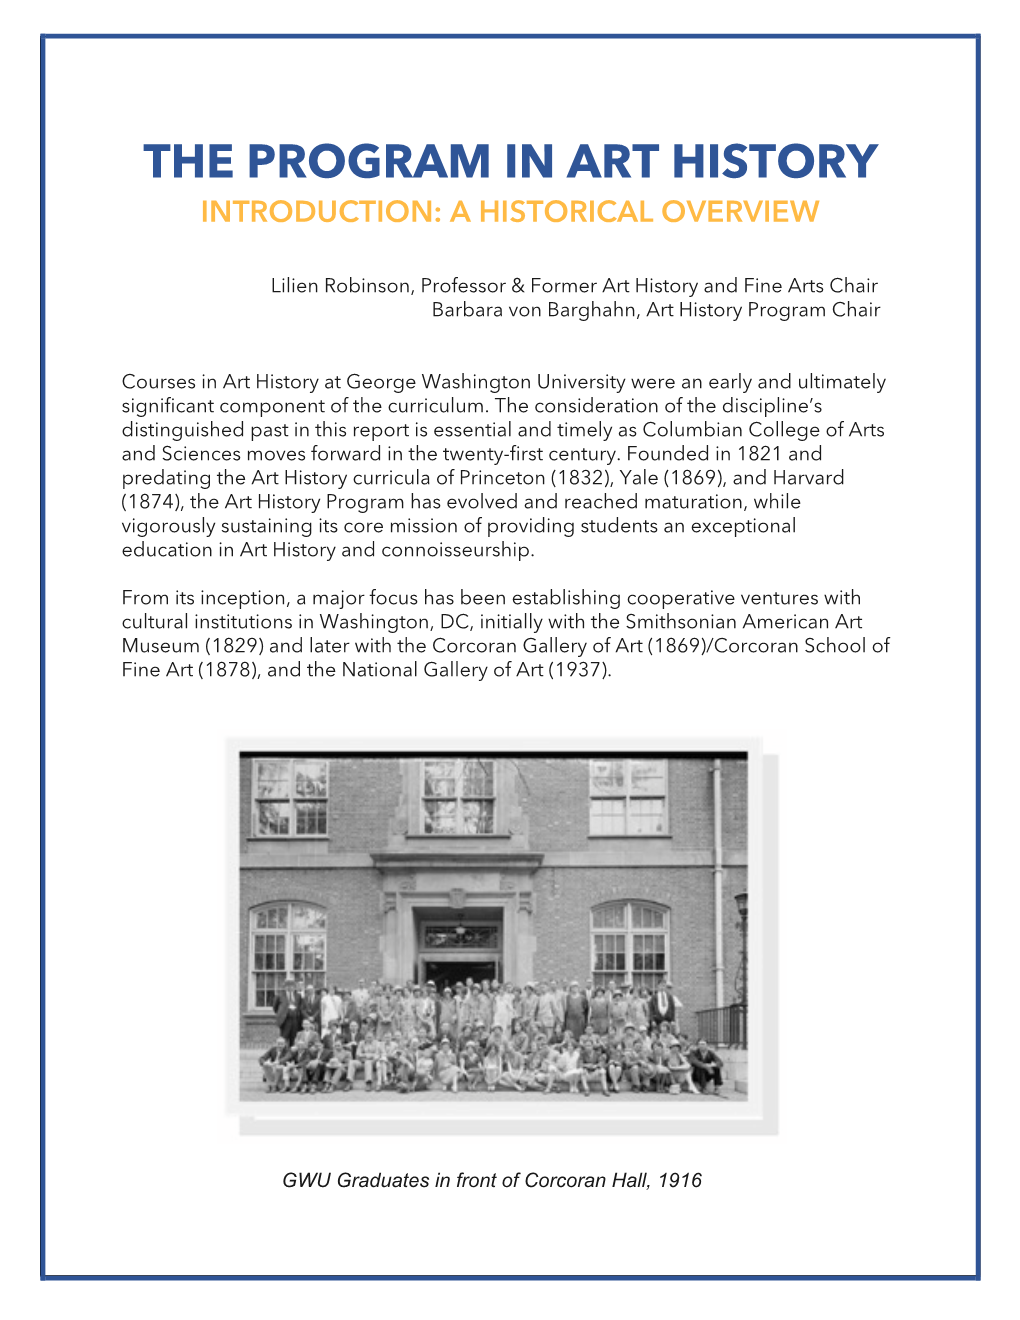 The Program in Art History Introduction: a Historical Overview